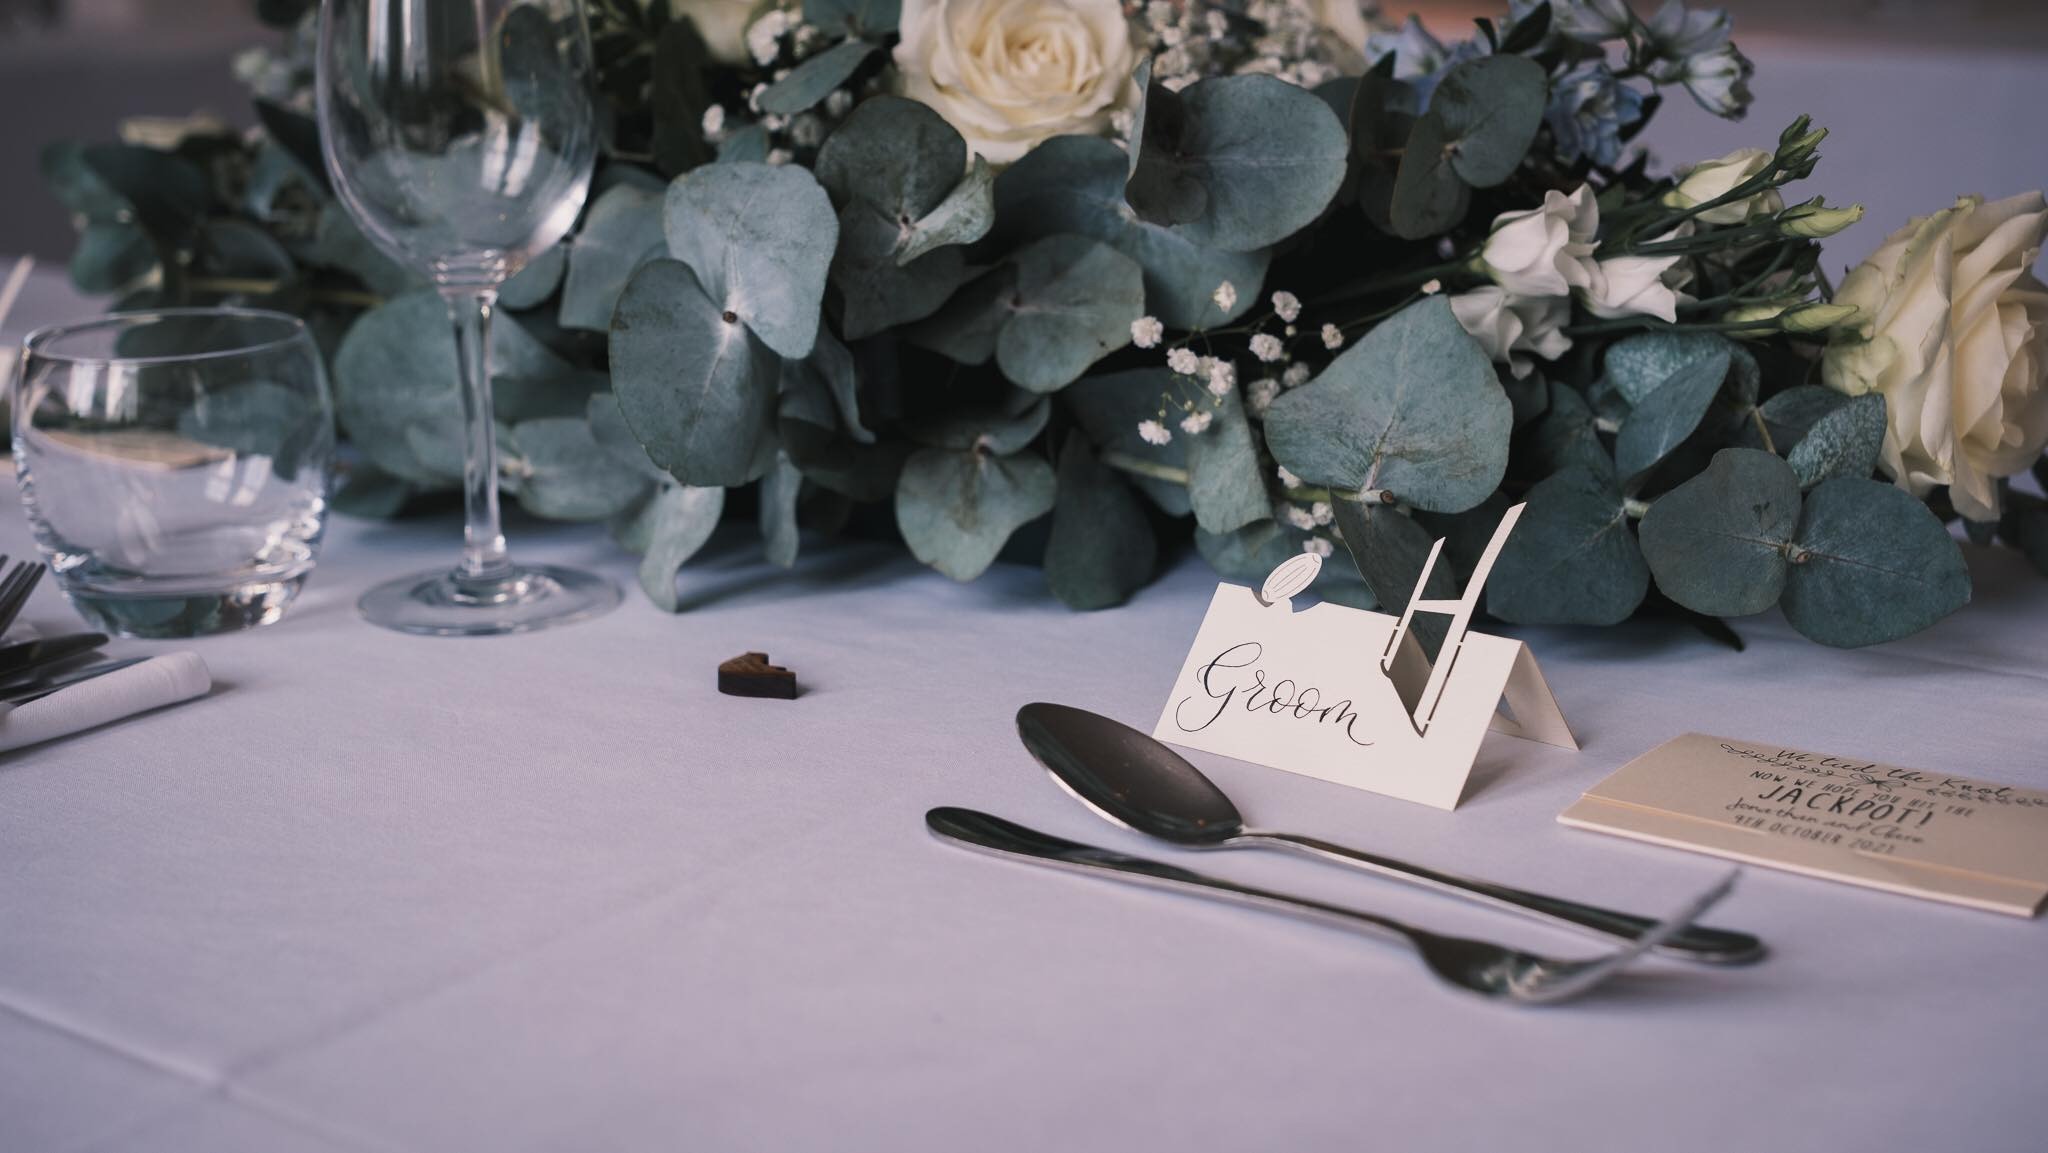 Rugby style table setting for groom written in calligraphy